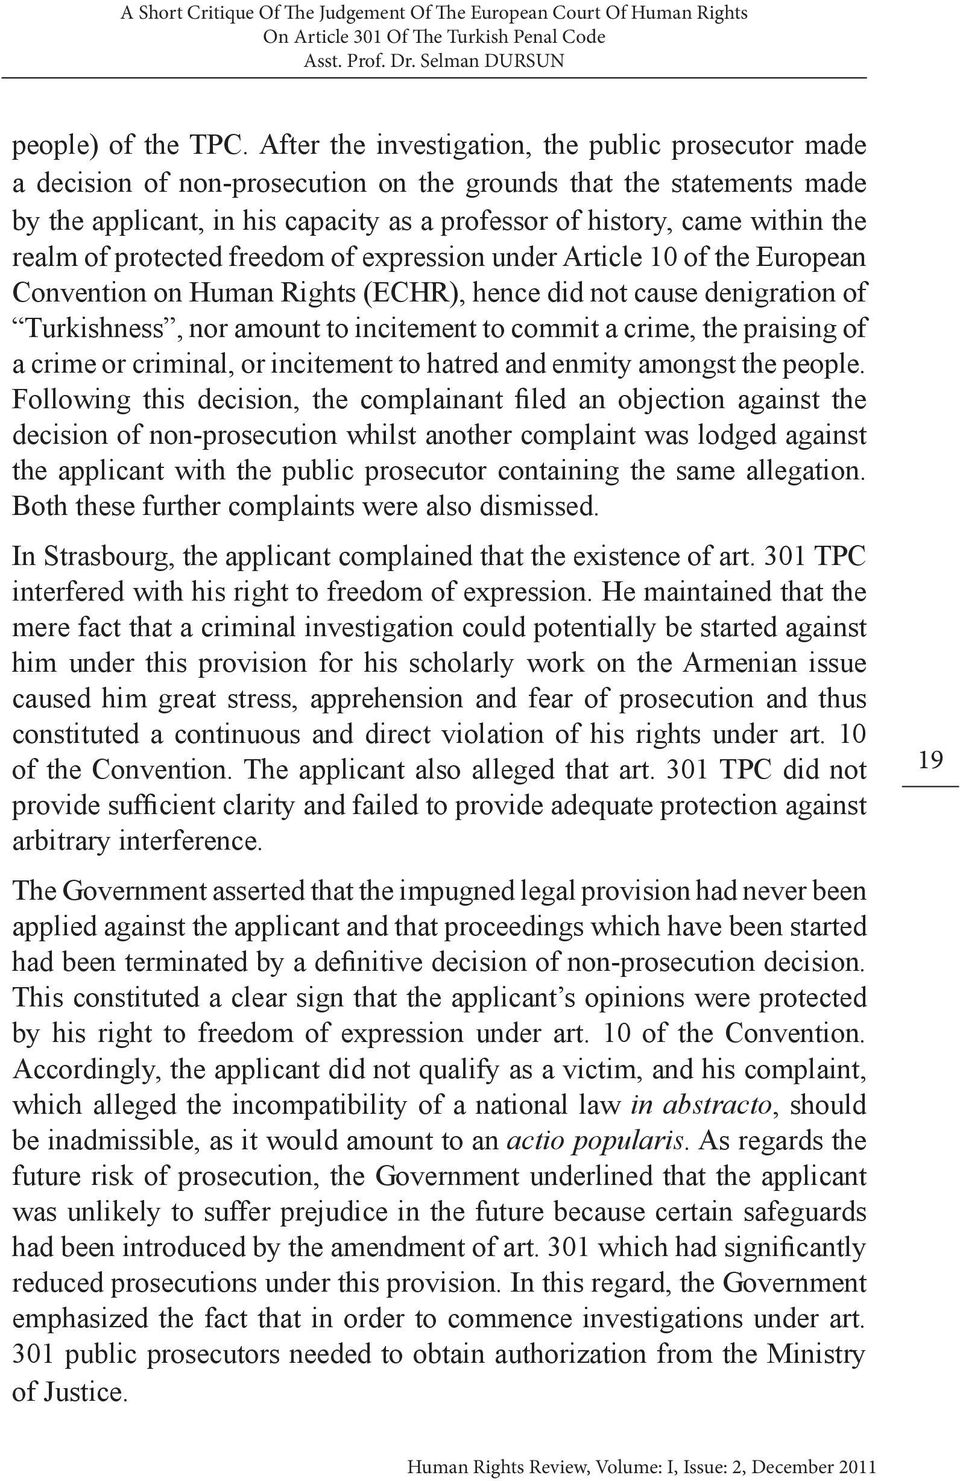 realm of protected freedom of expression under Article 10 of the European Convention on Human Rights (ECHR), hence did not cause denigration of Turkishness, nor amount to incitement to commit a